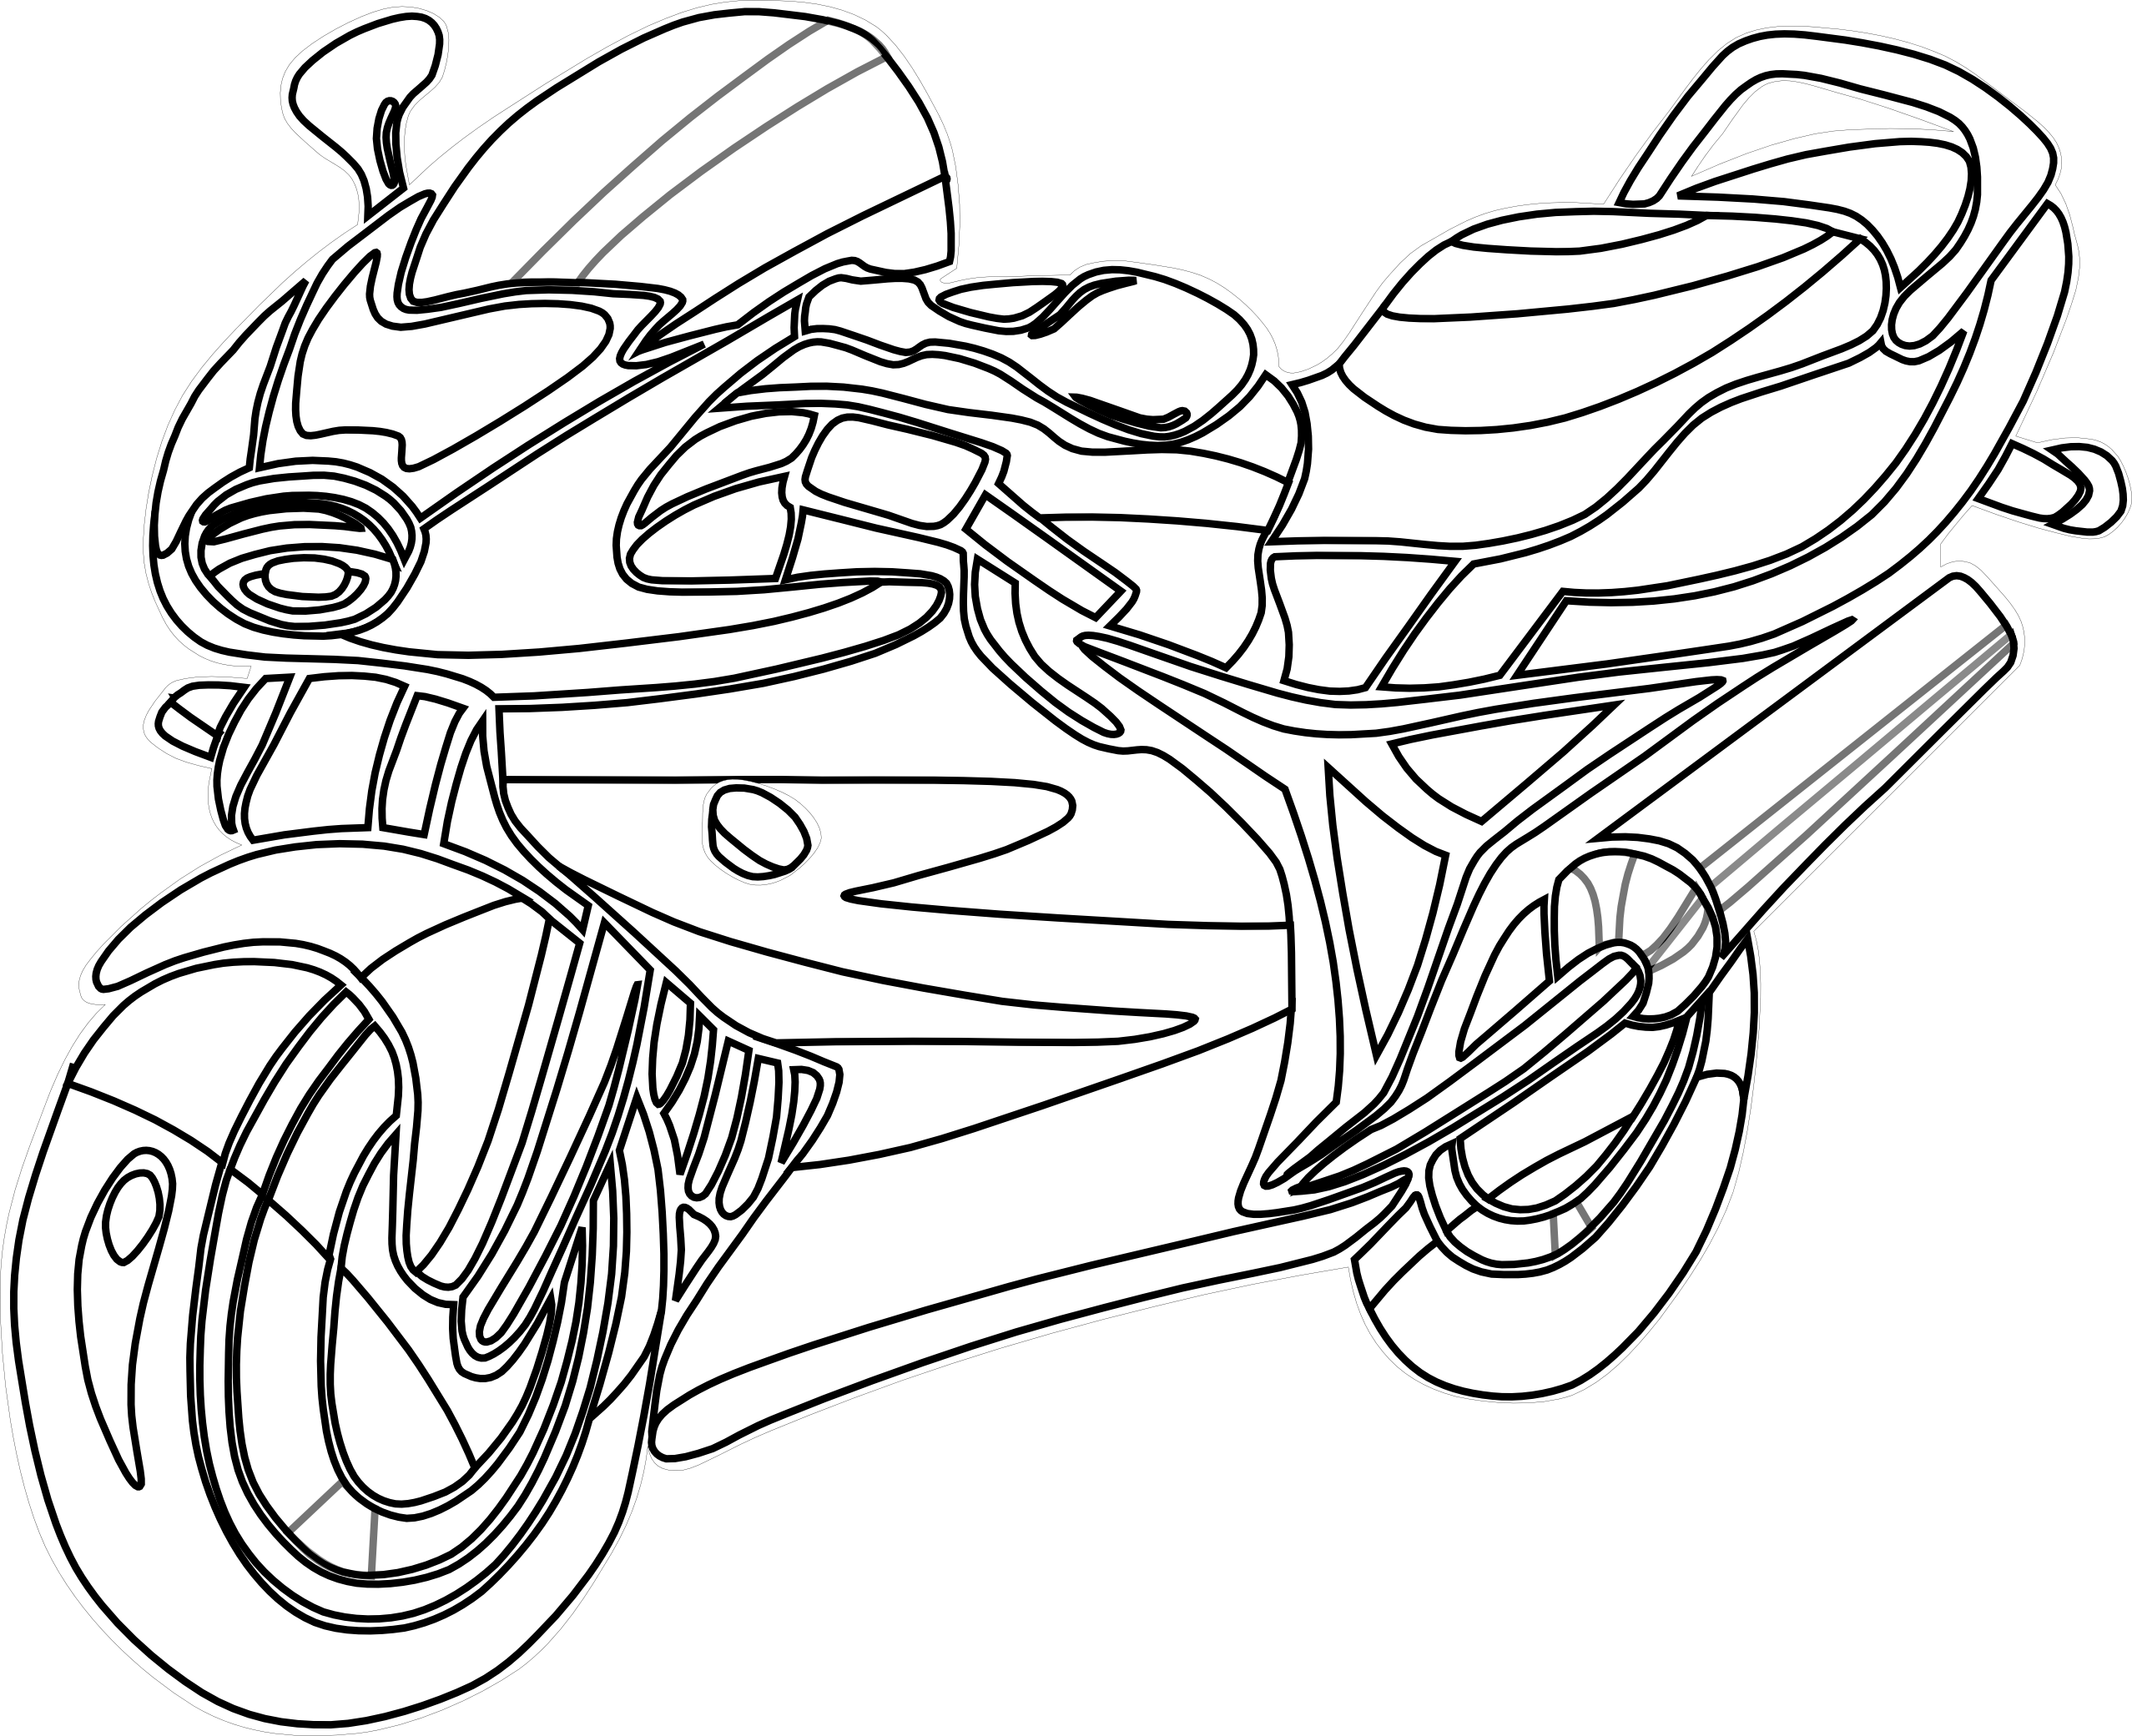 Motorcycle Chopper Clipart | Clipart Panda - Free Clipart Images